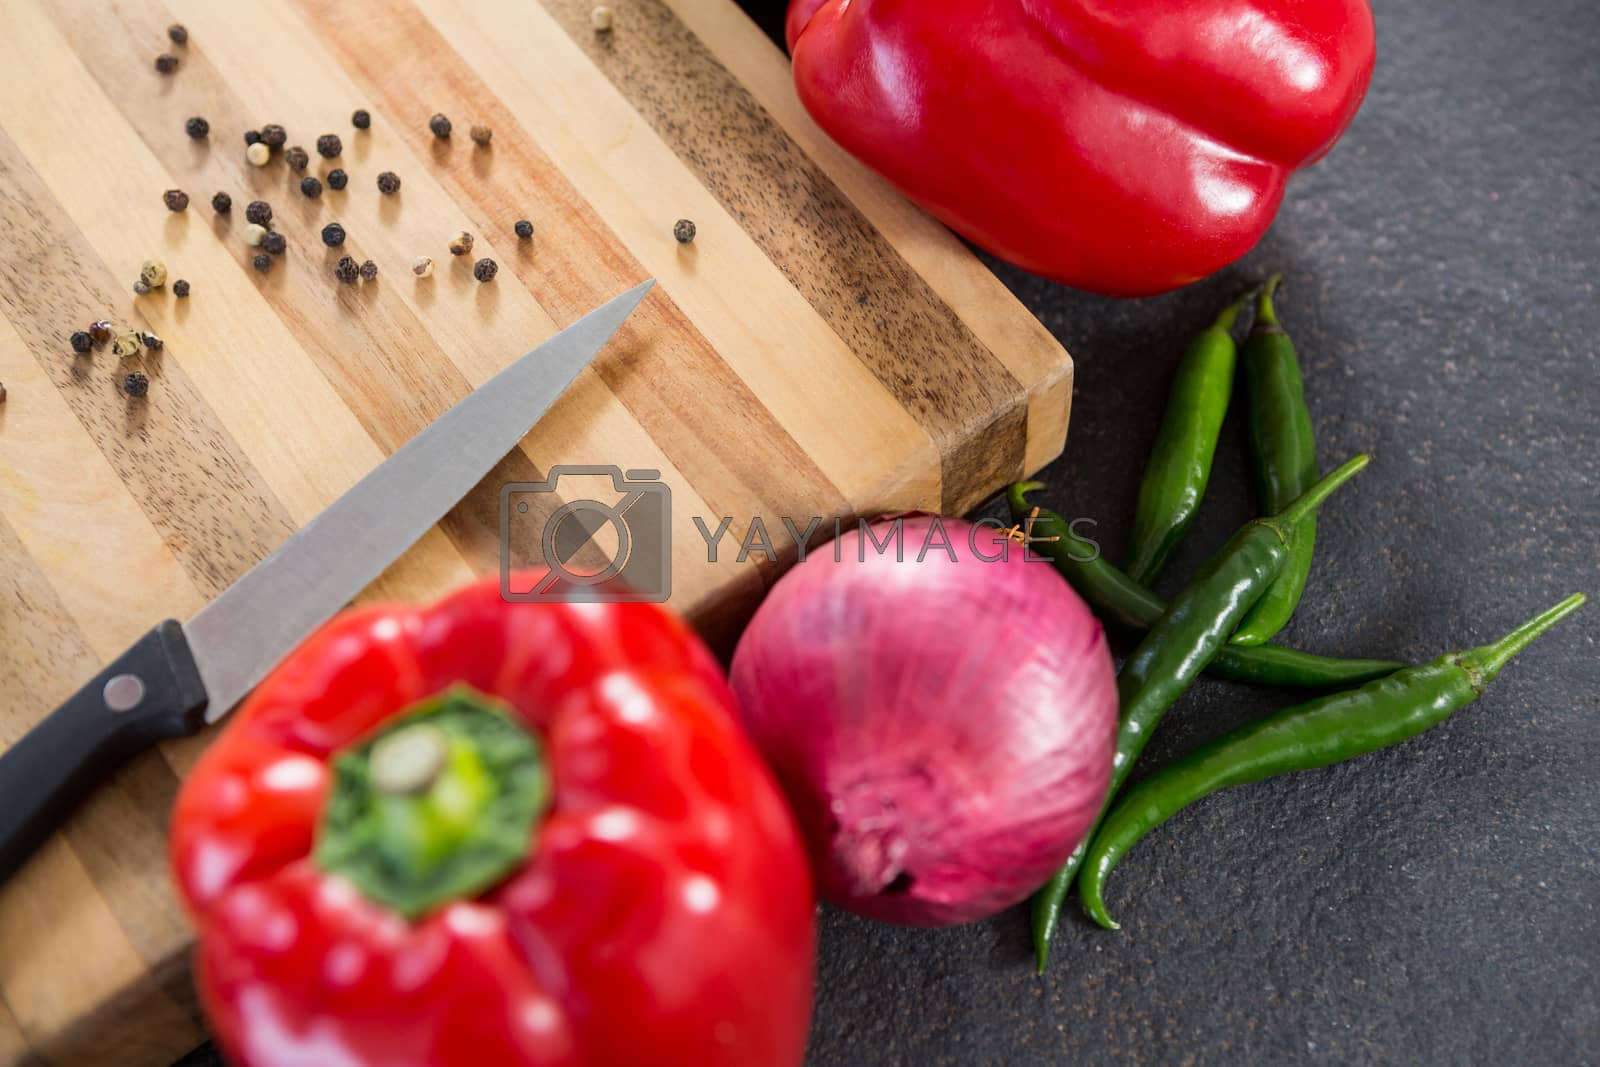 Royalty free image of Bell pepper, onion, chillies and knife on wooden board by Wavebreakmedia